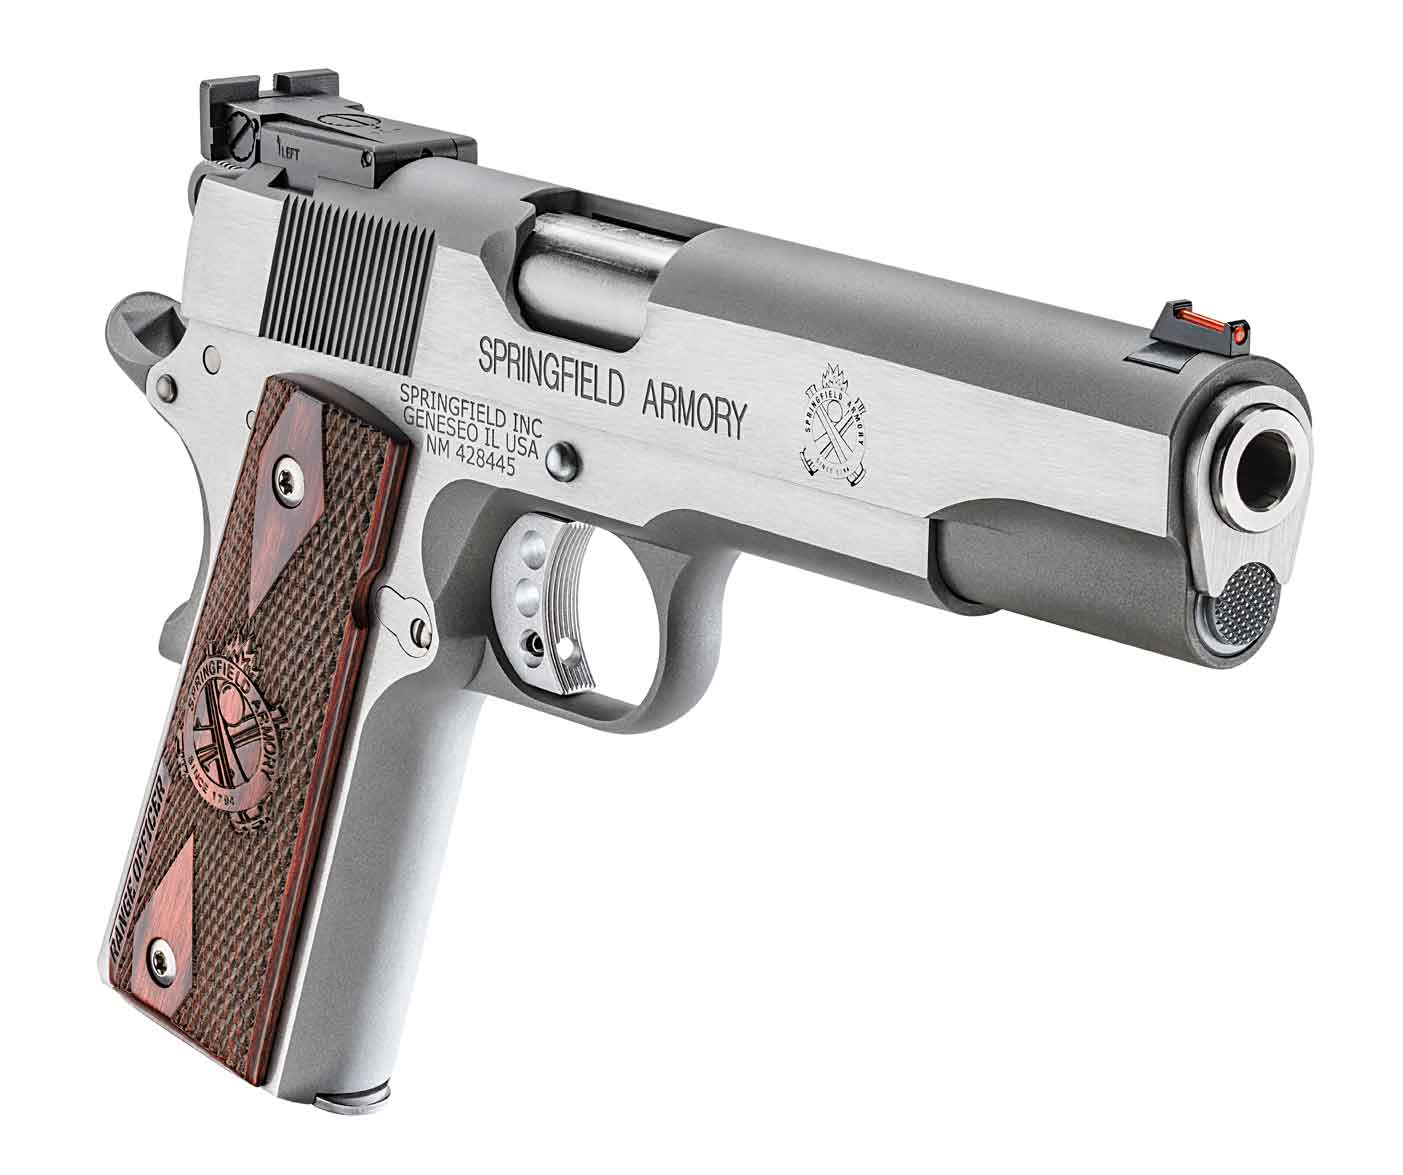 1911 Springfield Armory Logo - Springfield Armory 1911 Range Officer Now Available In Stainless Steel